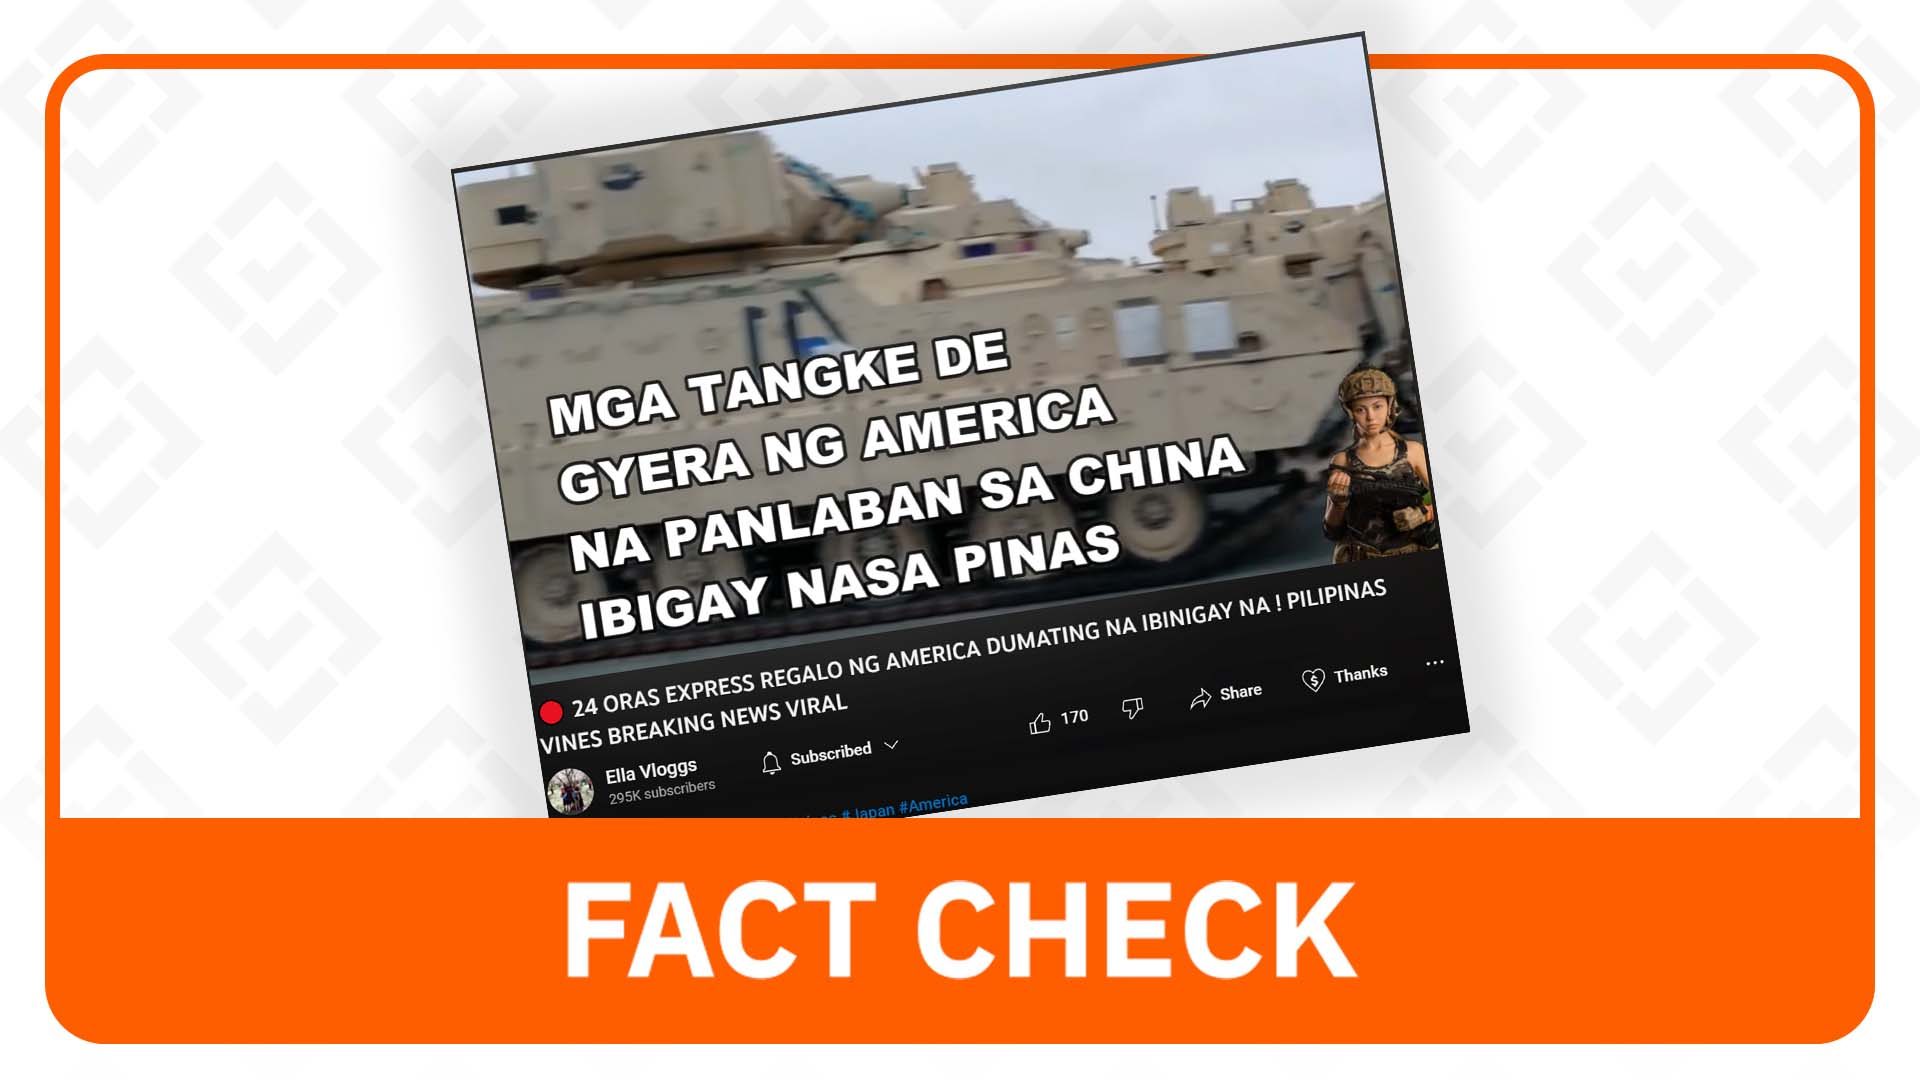 FACT CHECK: The Philippines has not been gifted tanks by the US in 2023